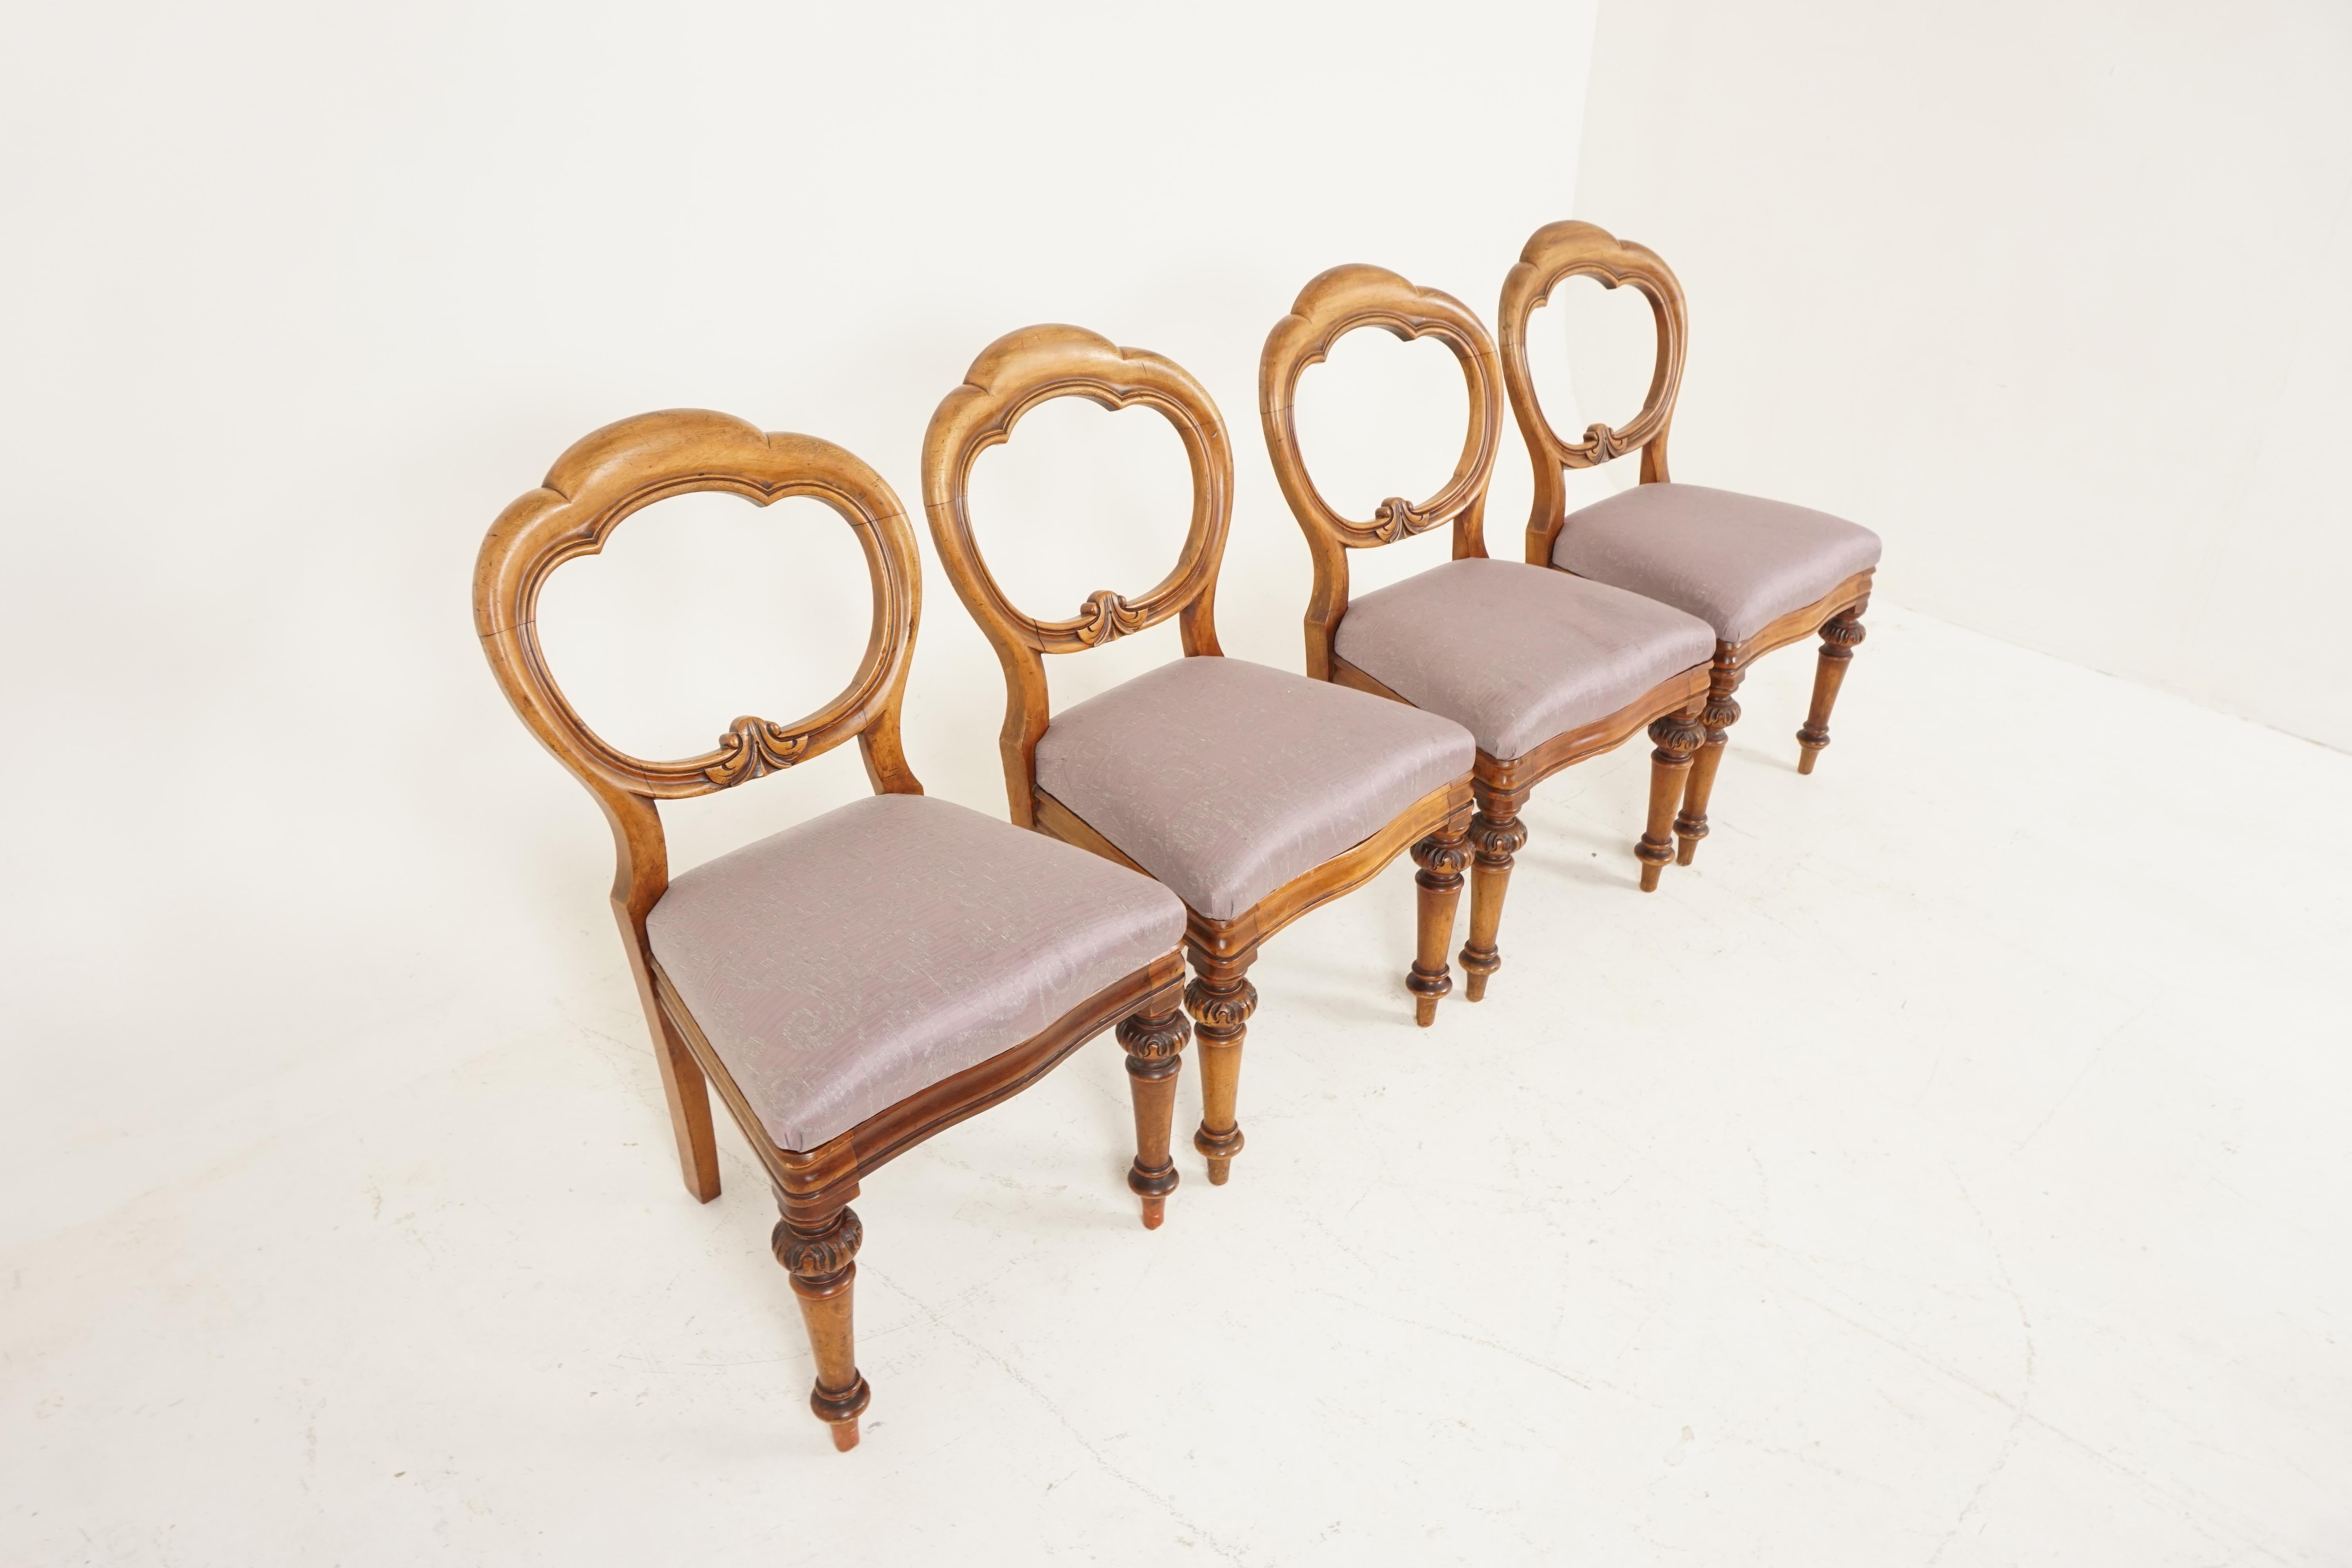 Antique balloon back dining chairs, walnut, Set of 4, Scotland 1880, B2500

Scotland 1880
Solid walnut
Original finish
Attractive crown rail on top
Carved fretted center rail
Upholstered overstuffed lift up seat
Carved turned legs to the front
Out